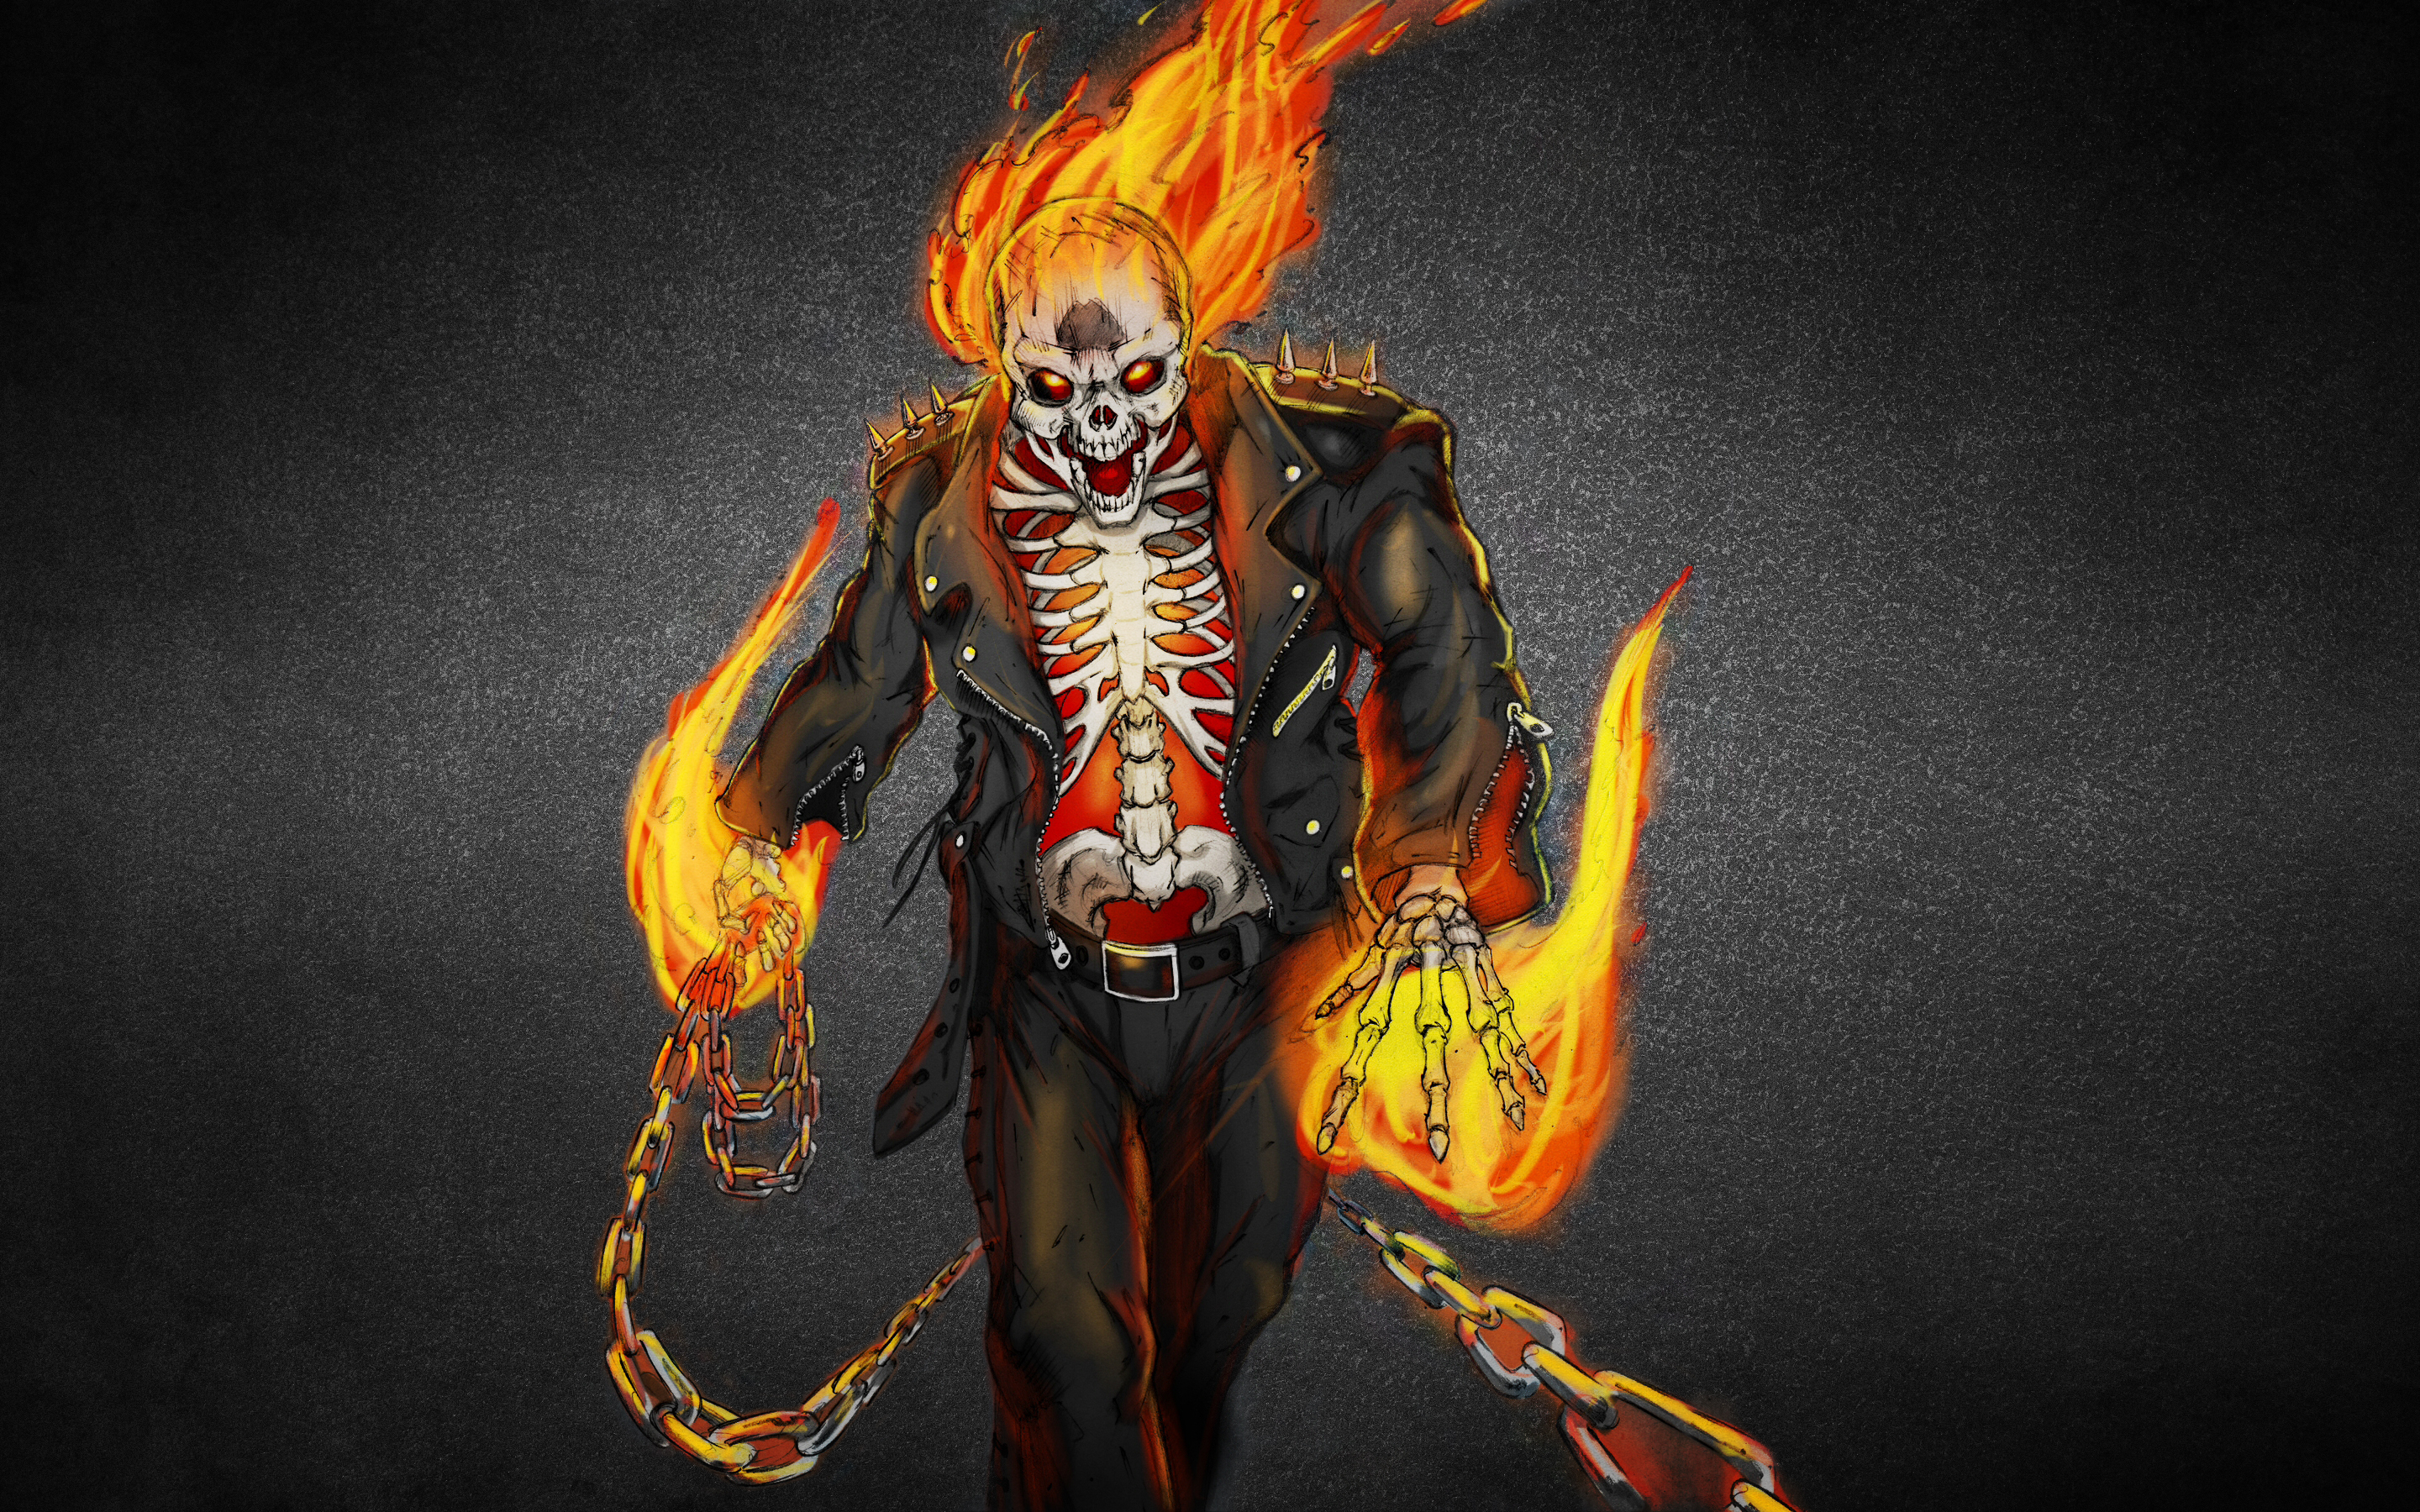 Fire Flame Skull Dark Background Wallpaper Photos Pictures